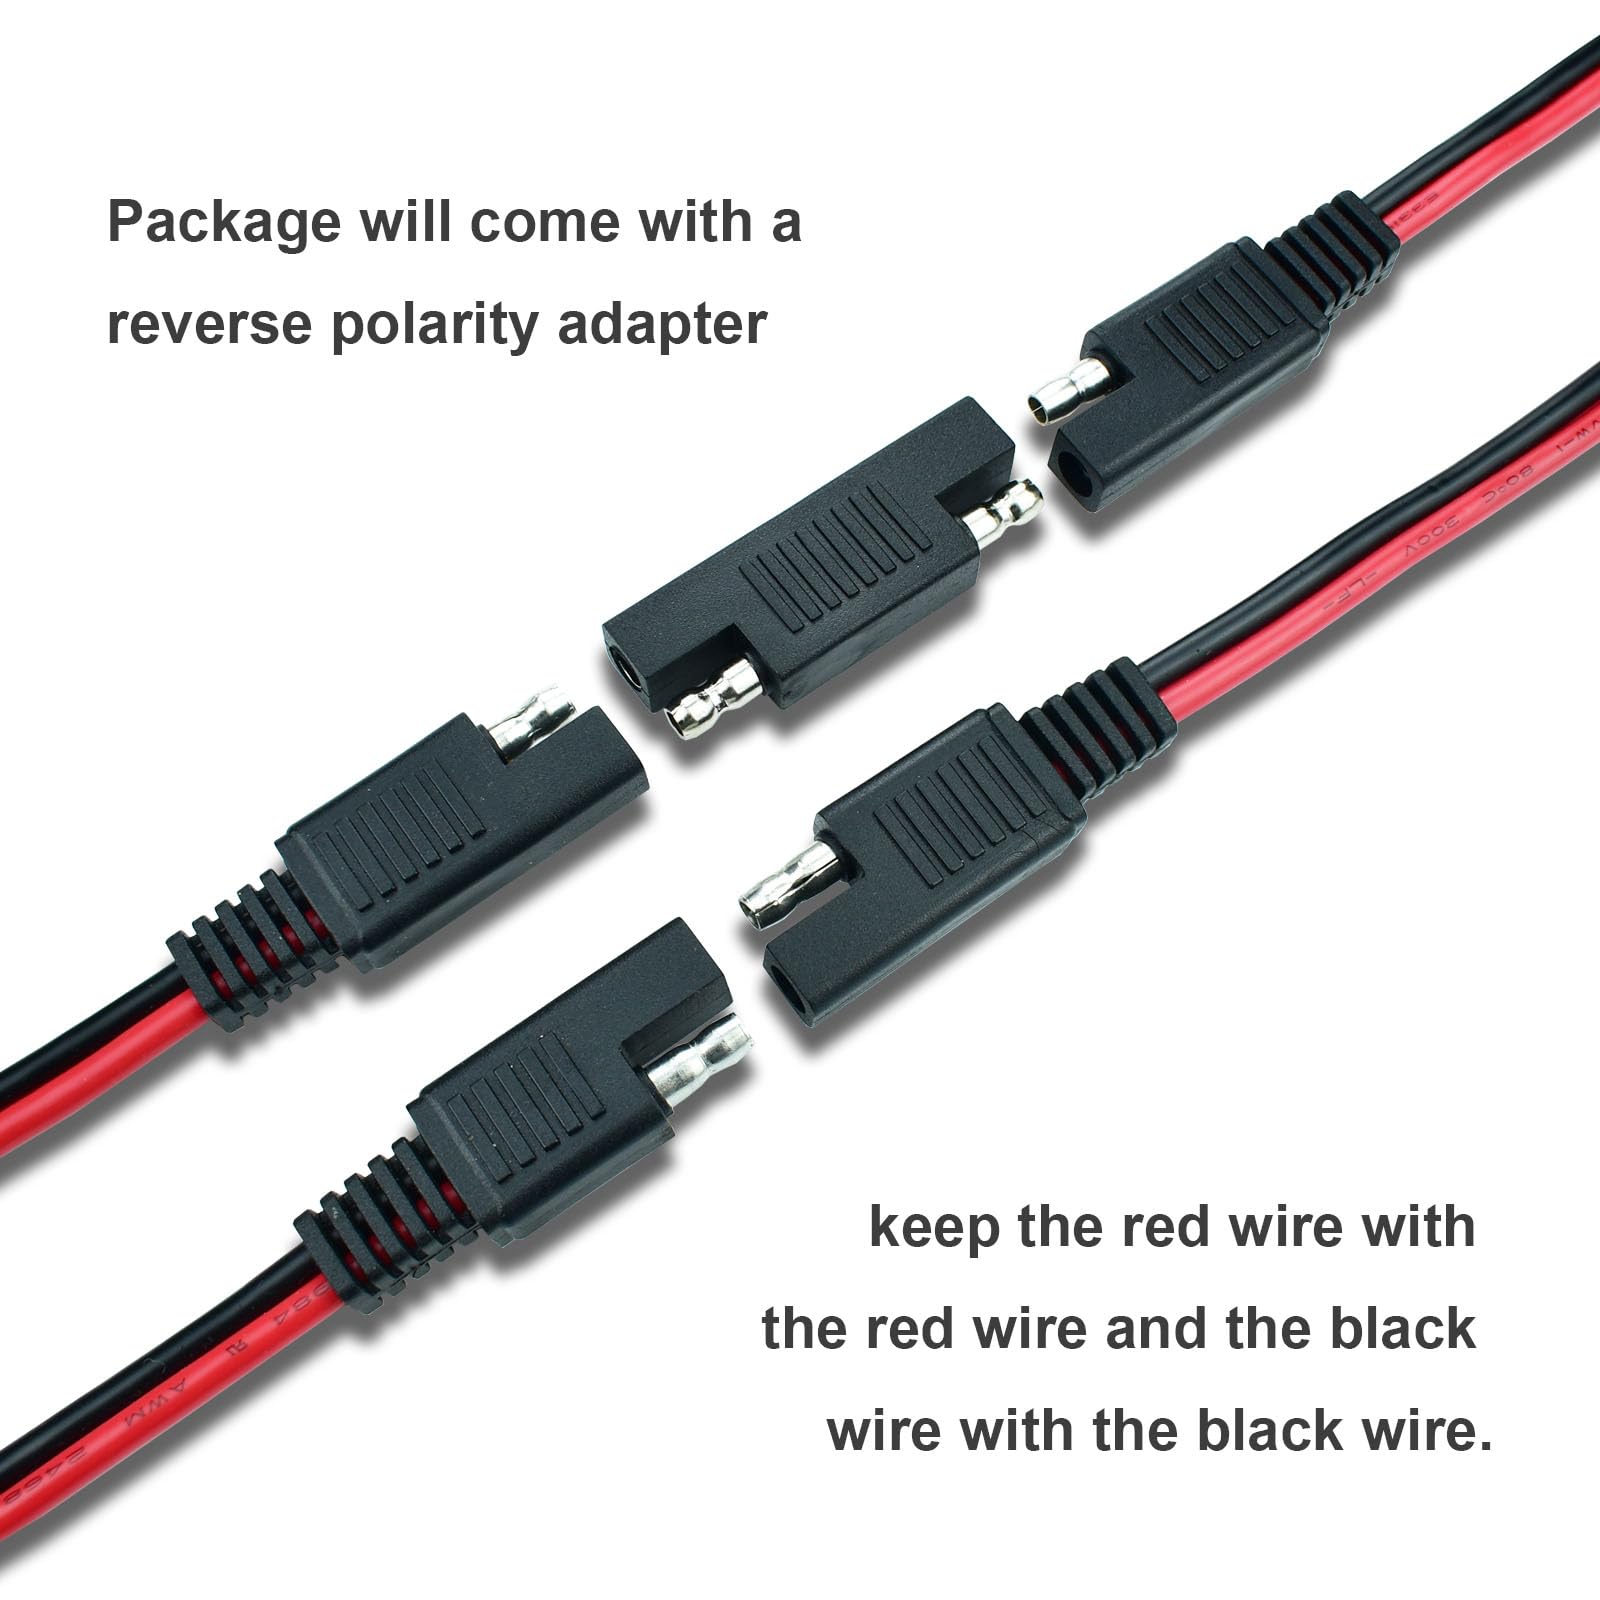 Ihurllu SAE Extension Cable, 10Feet SAE to SAE Extension Cord, 14AWG 2pin Quick Disconnect Harness Wire for Solar Panel and Battery Charging, 2PACK with One Reverse Polarity Connector